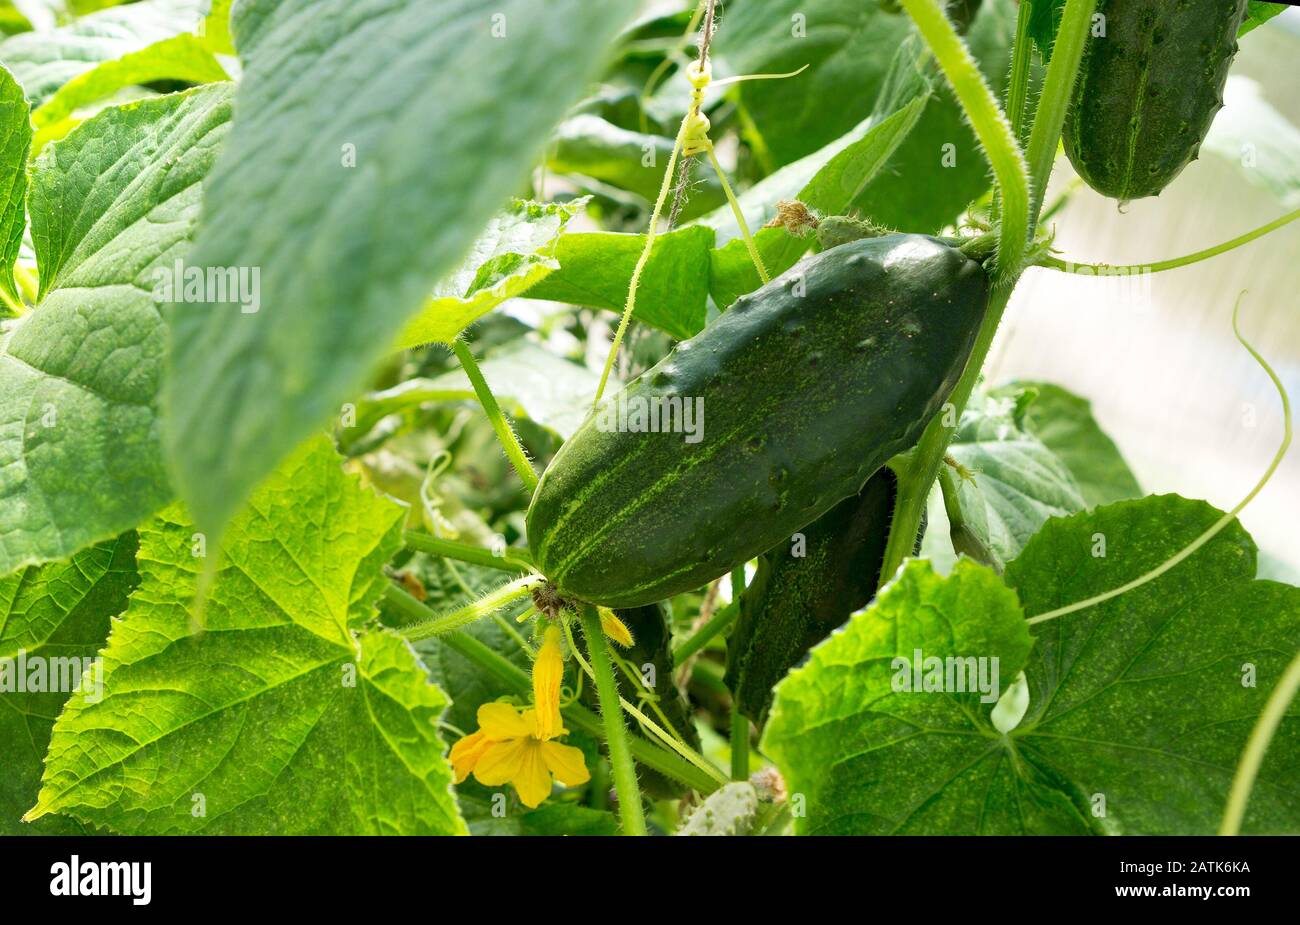 Cucumber plant. Cucumber with leafs and flowers. Cucumbers in the garden Stock Photo